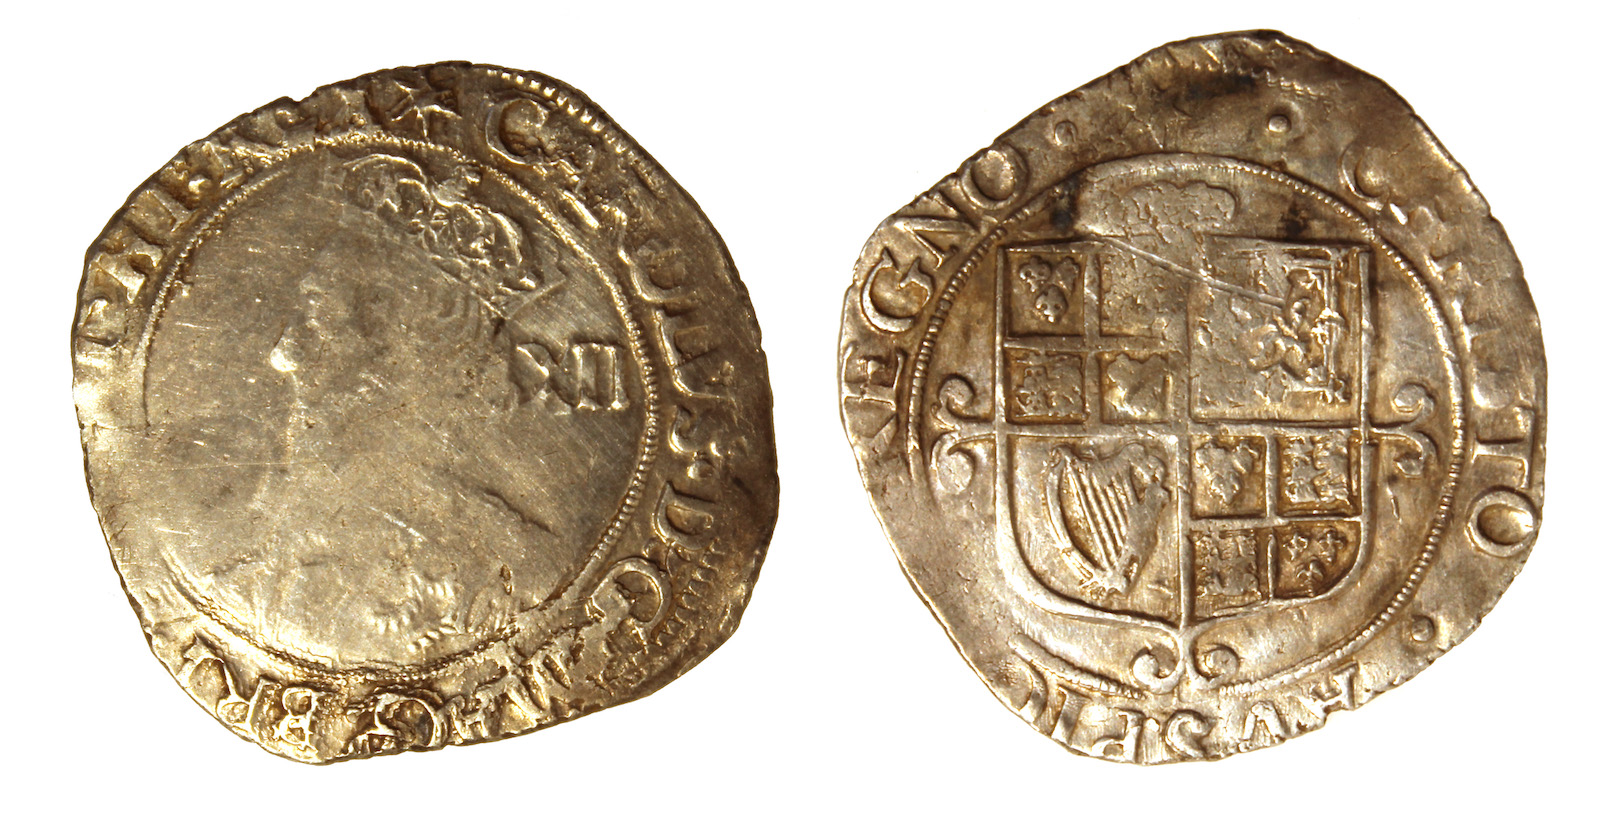 A Charles I shilling, minted in 1644-45, showing signs of clipping as part of the Yellow Trade. The Portable Antiquities Scheme/ The Trustees of the British Museum (CC BY-SA 4.0).